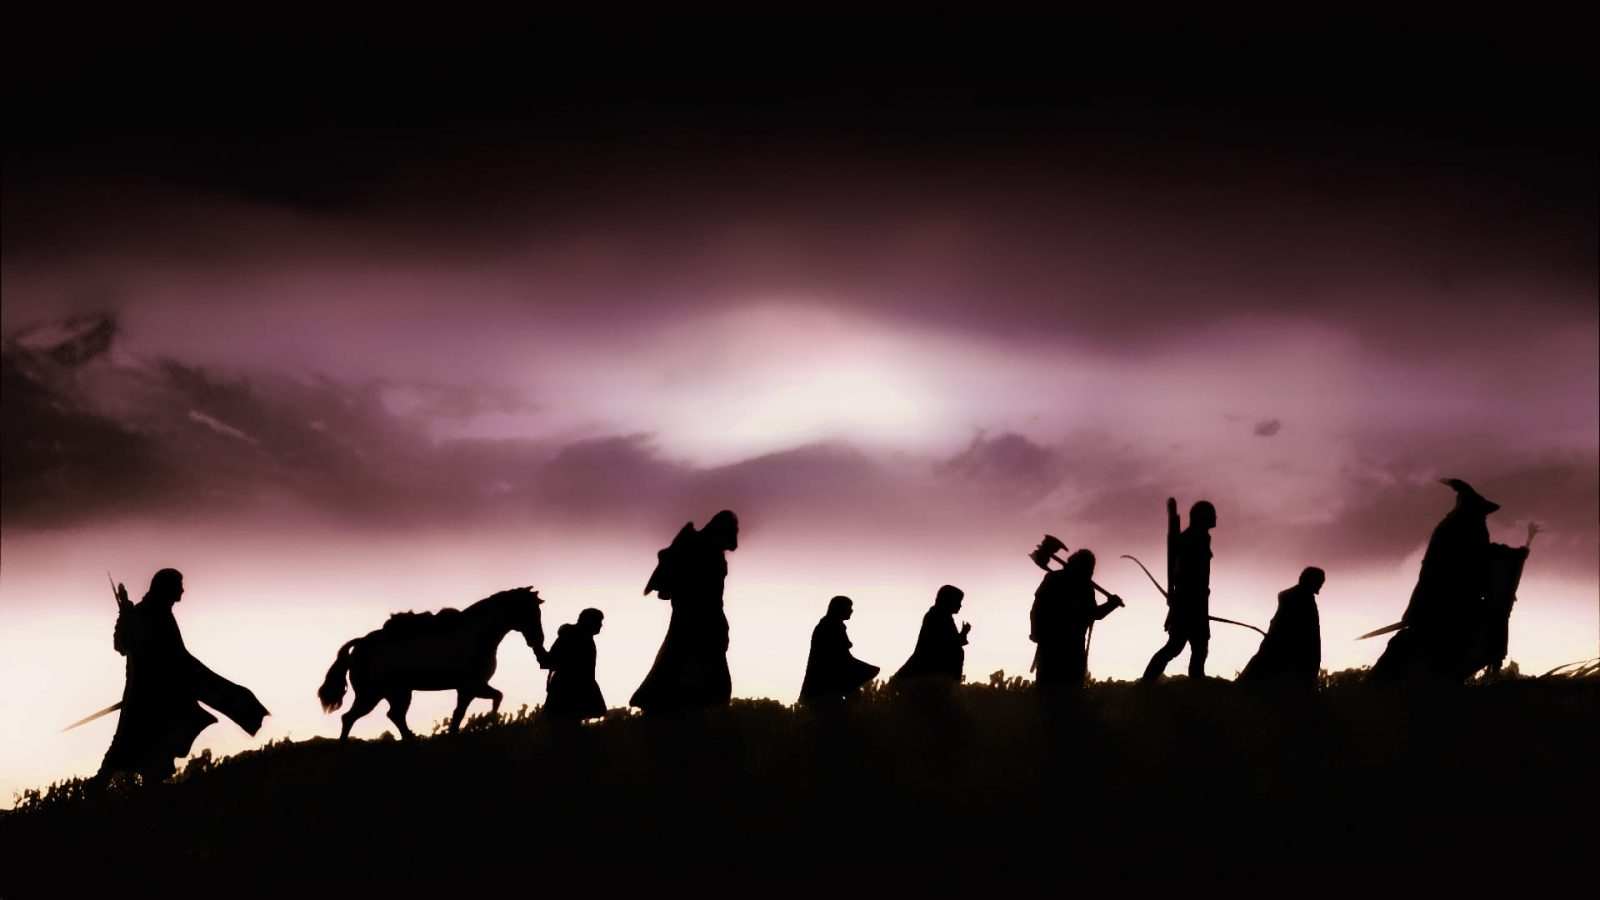 lord of the rings fellowship of the ring the silhouettes